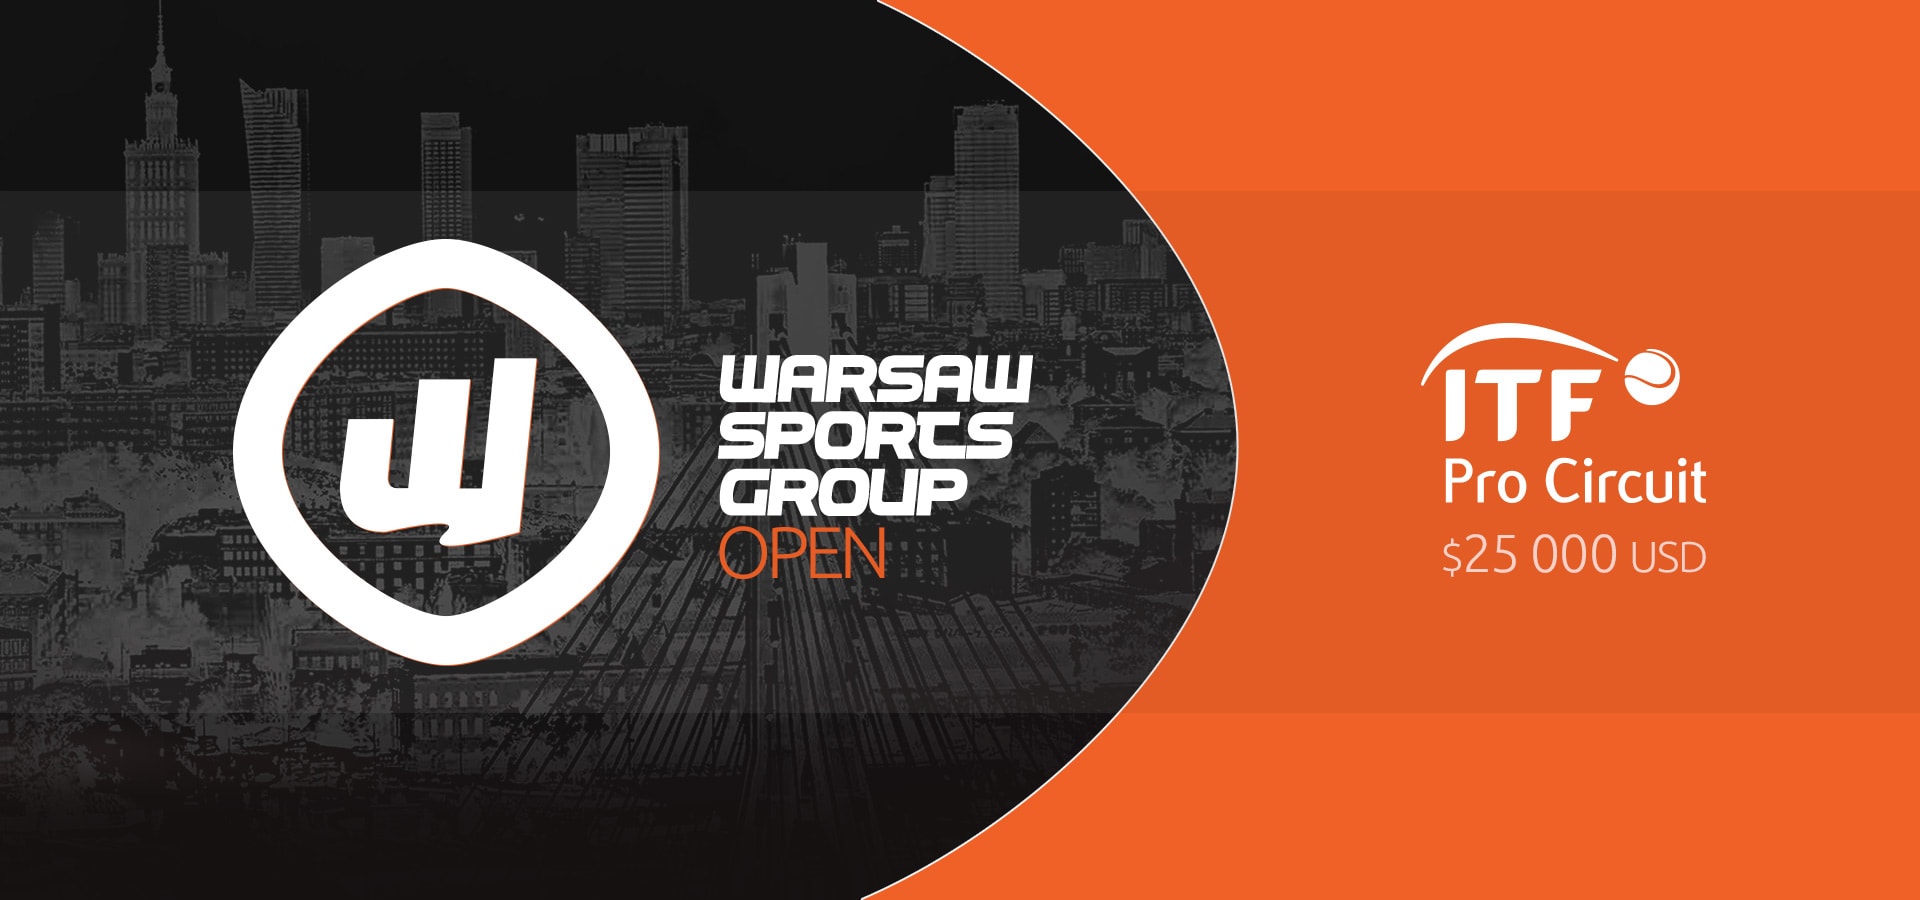 Warsaw Sports Group Open